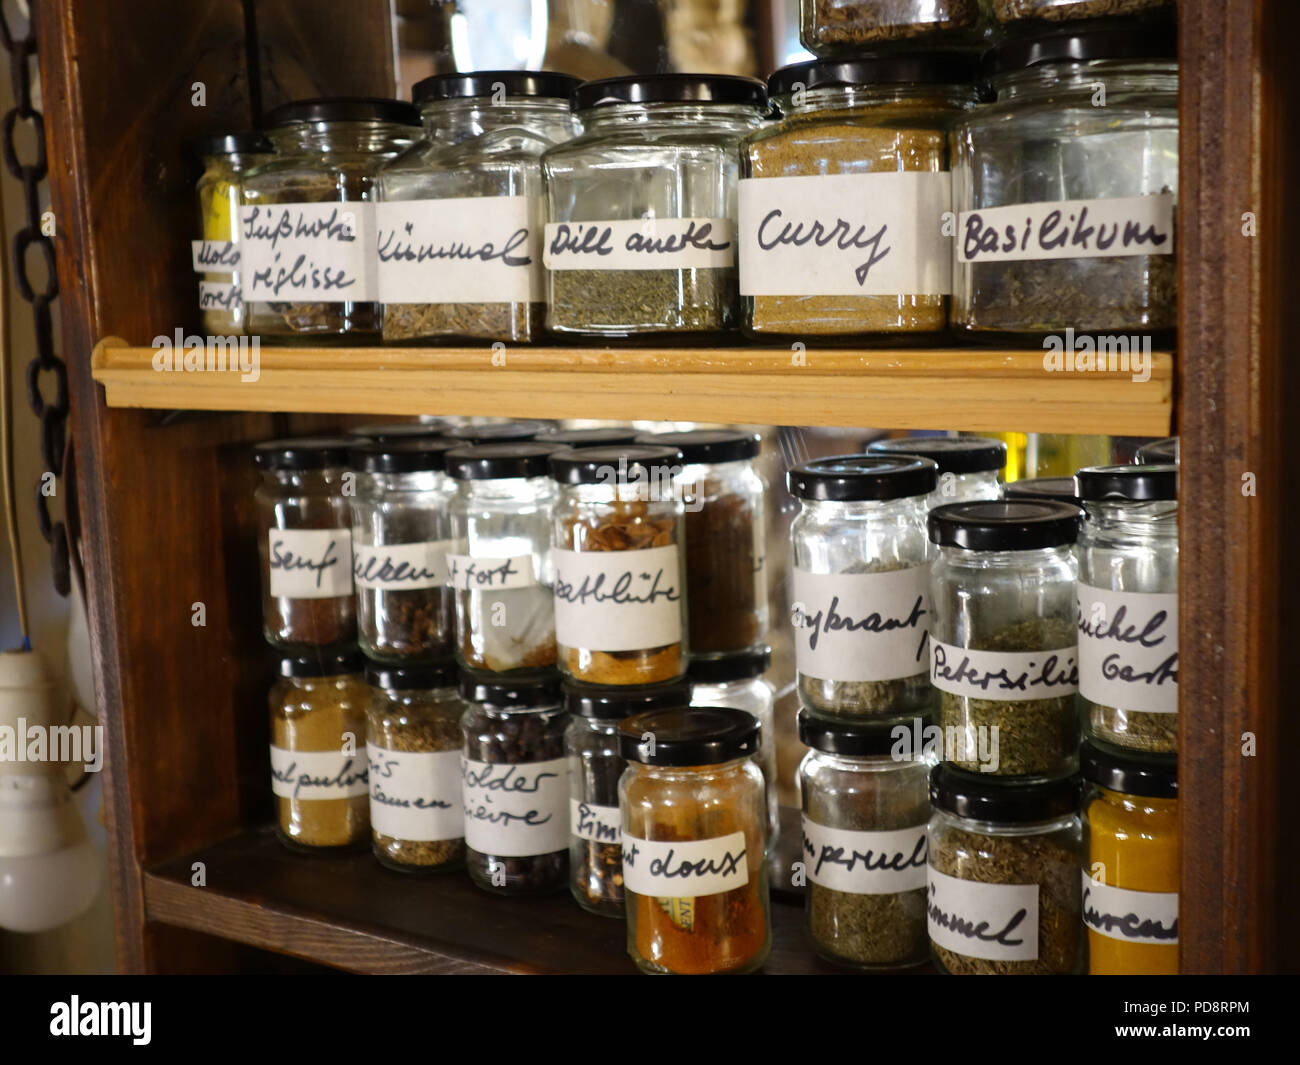 https://c8.alamy.com/comp/PD8RPM/neatly-labeled-spice-jars-and-herbs-on-a-shelf-in-a-french-farmhouse-kitchen-PD8RPM.jpg